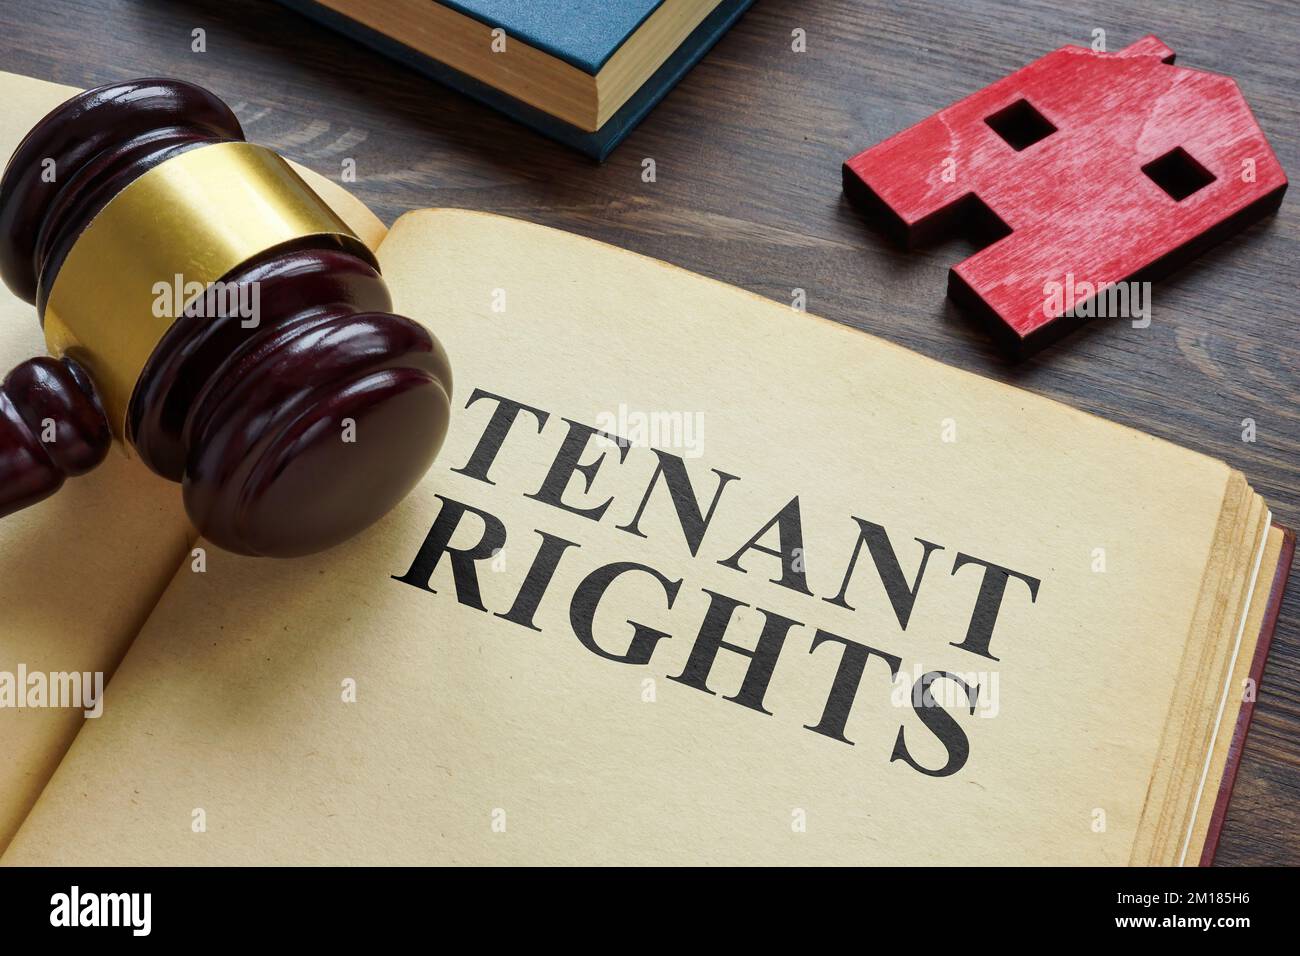 Book about Tenant rights and model of house. Stock Photo